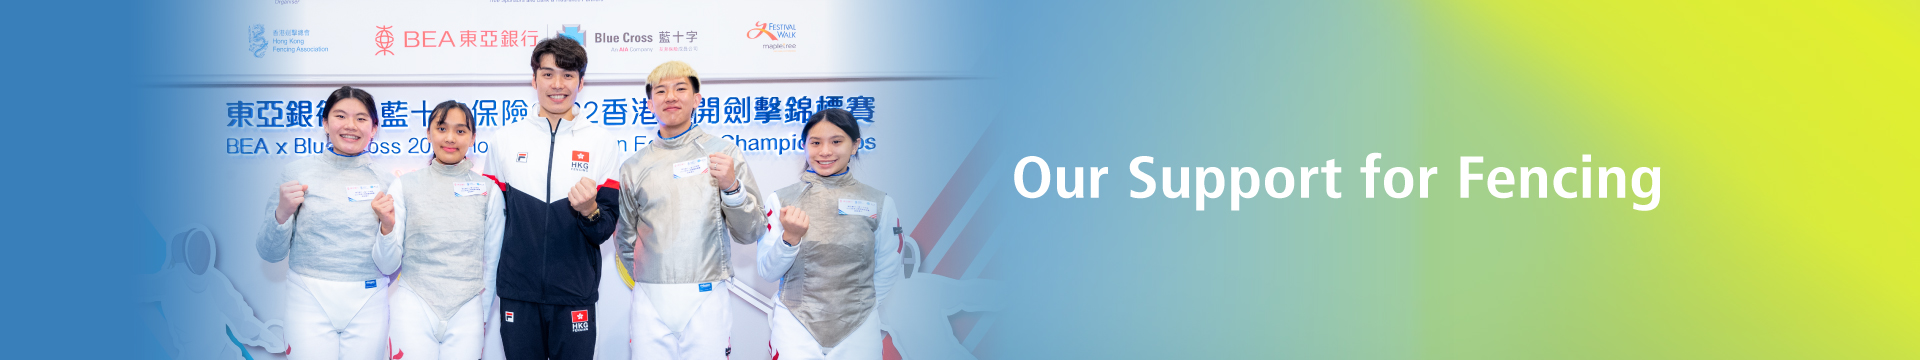 Planning is the key to success. Blue Cross gives me all-round protection. #ProudlySupportHongKongFencing